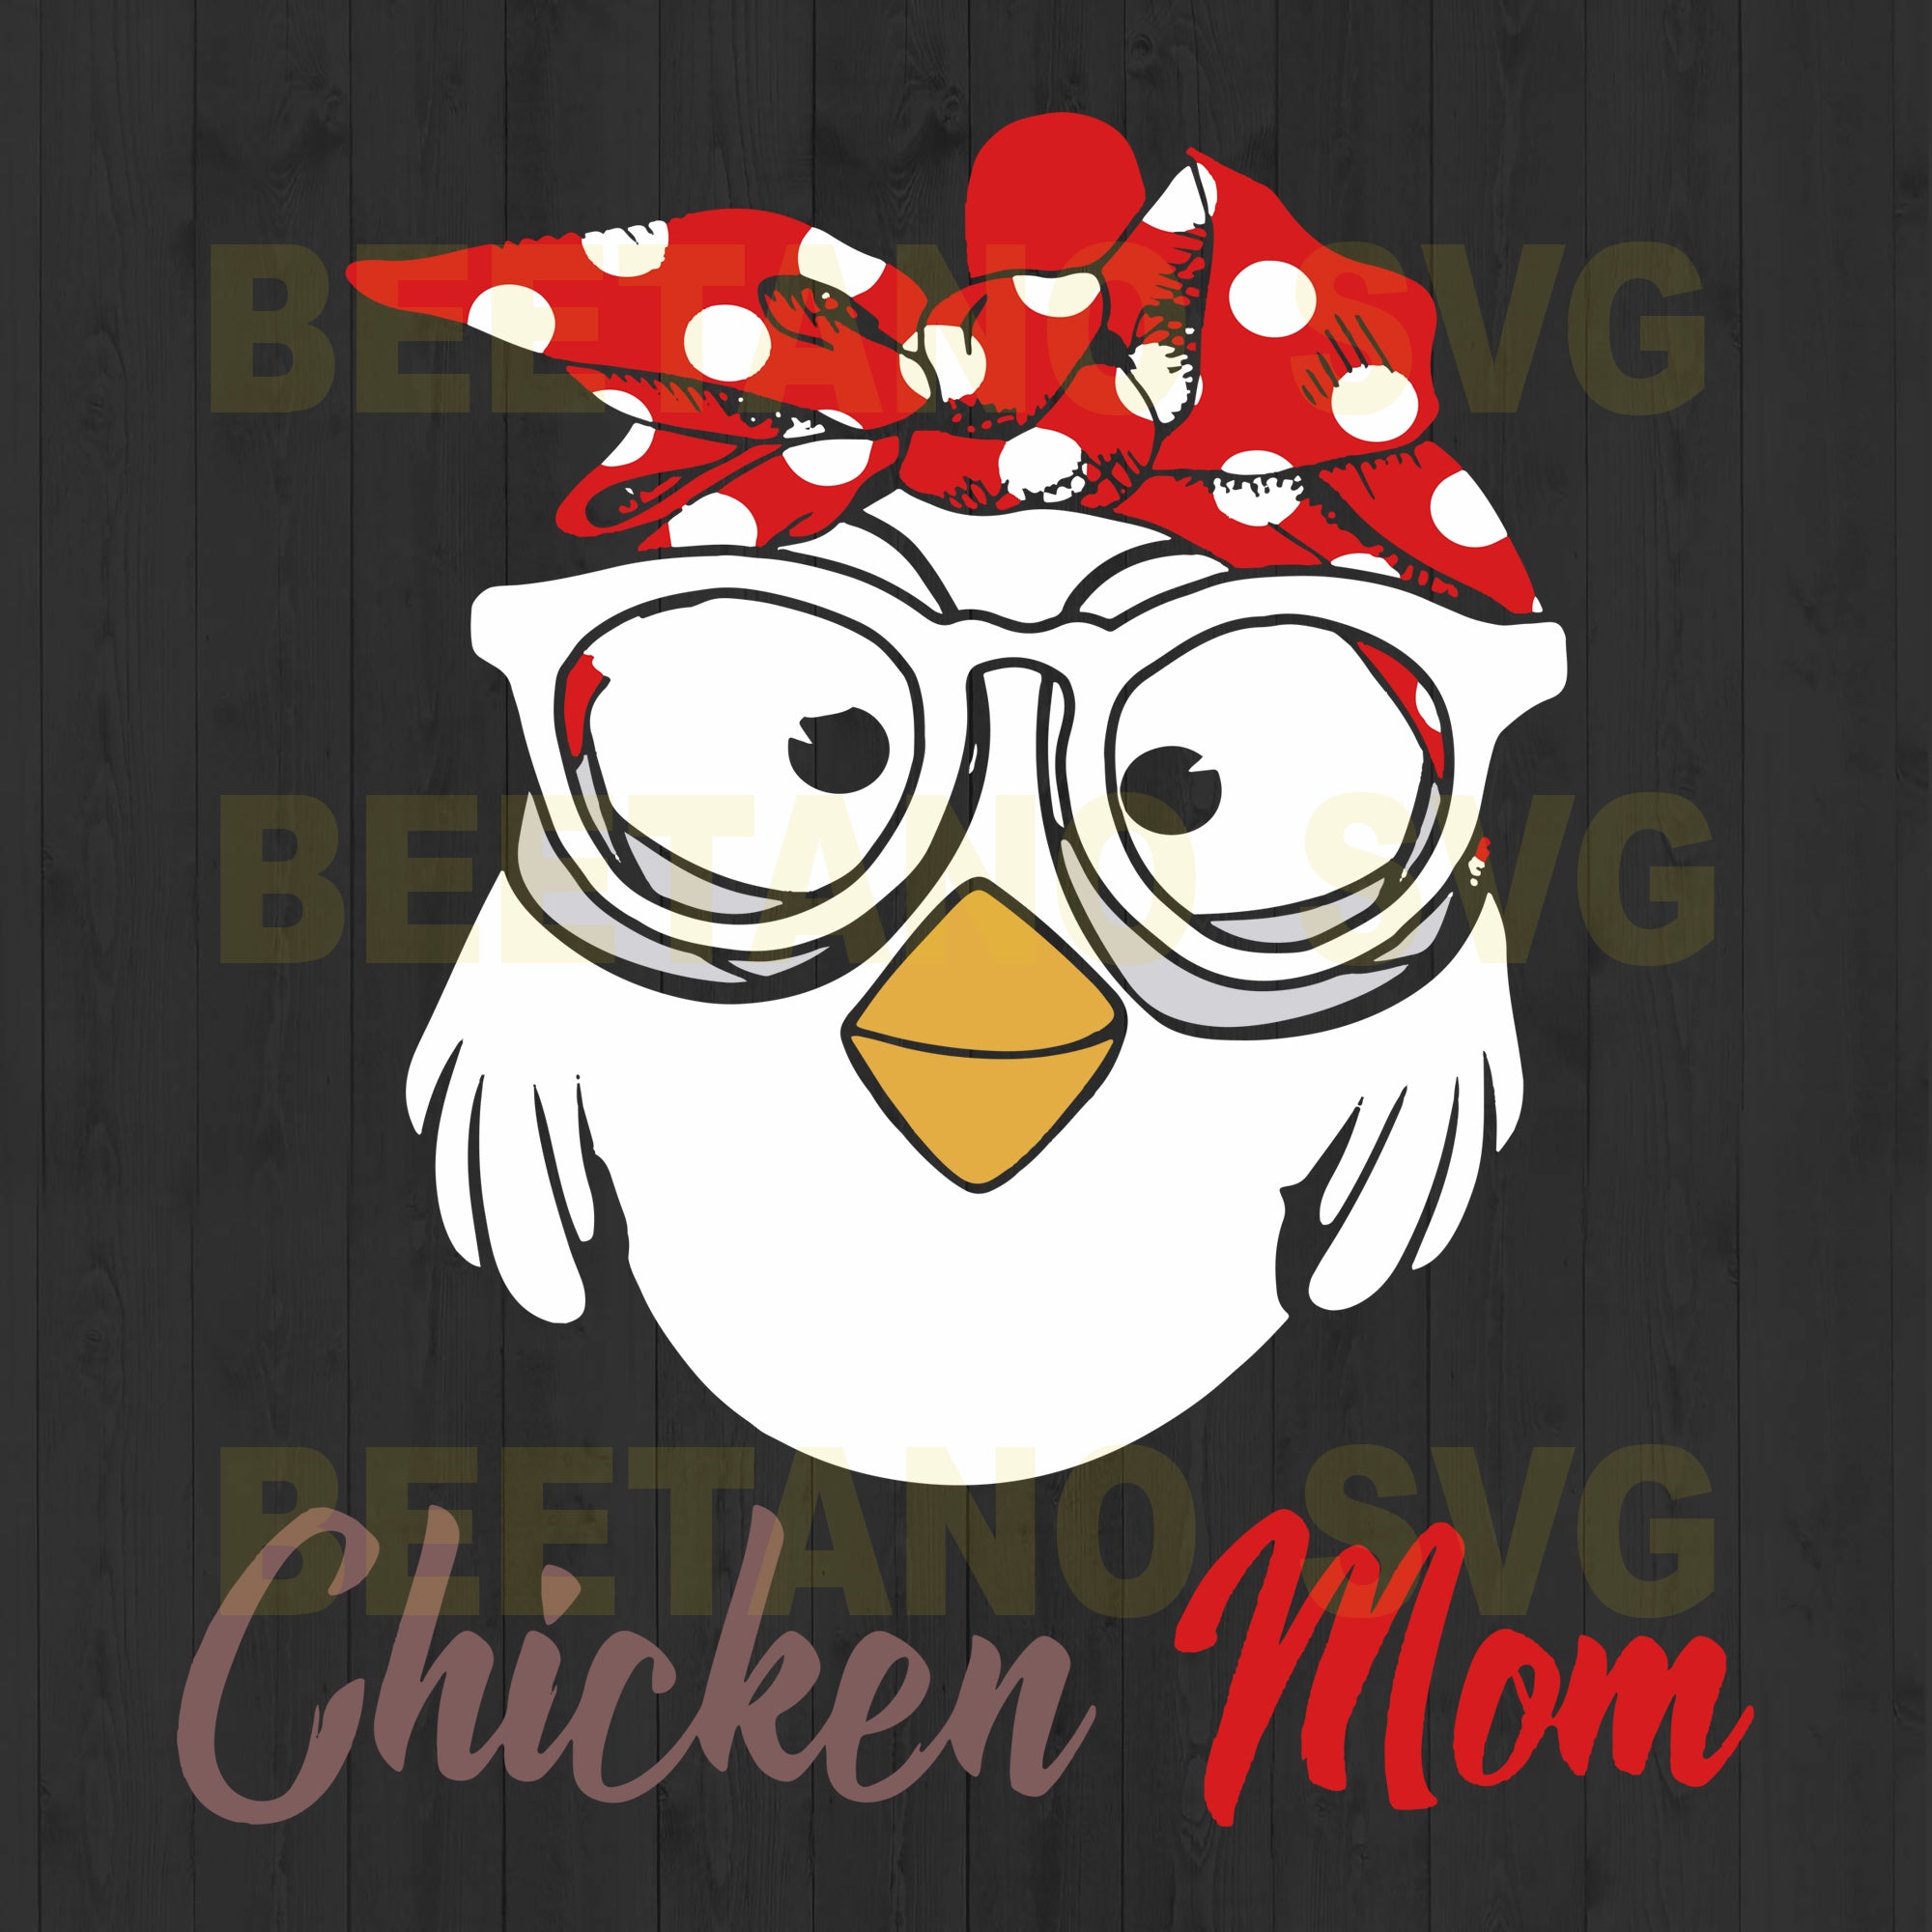 Download Chicken Mom High Quality Svg Cut Files Best For Unique Craft Beetanosvg Scalable Vector Graphics